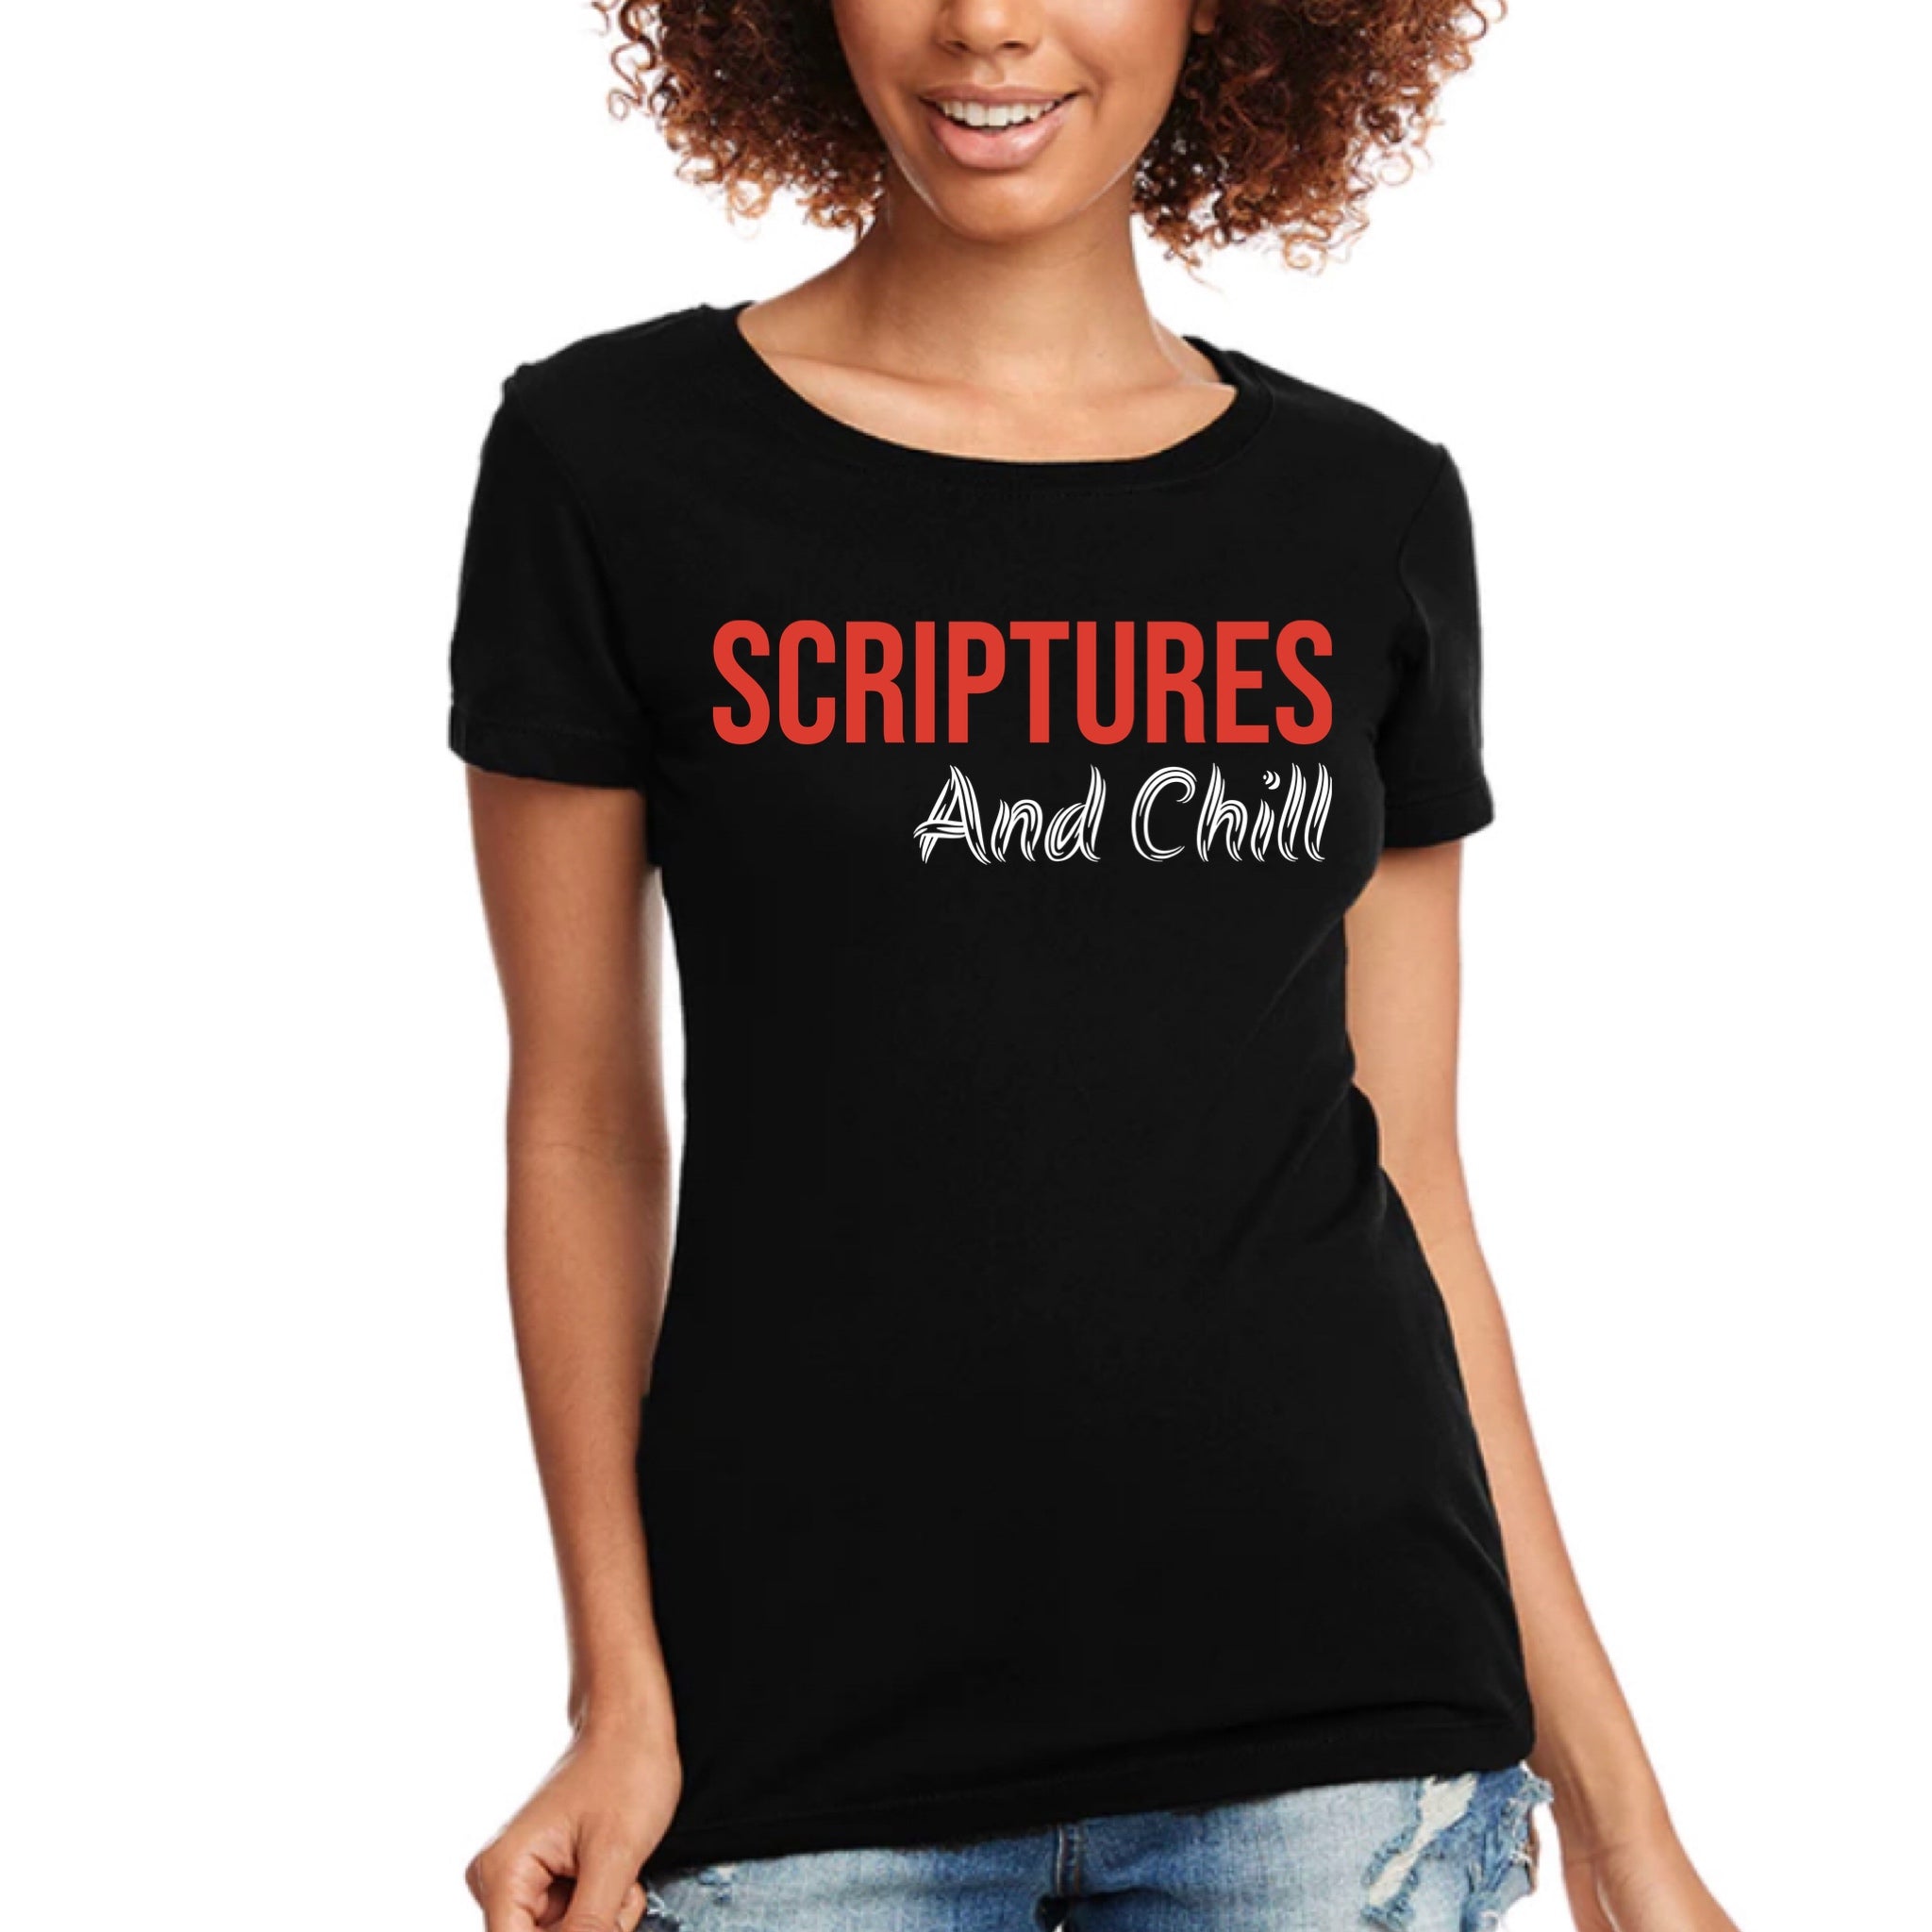 Mens Scripture And Chill